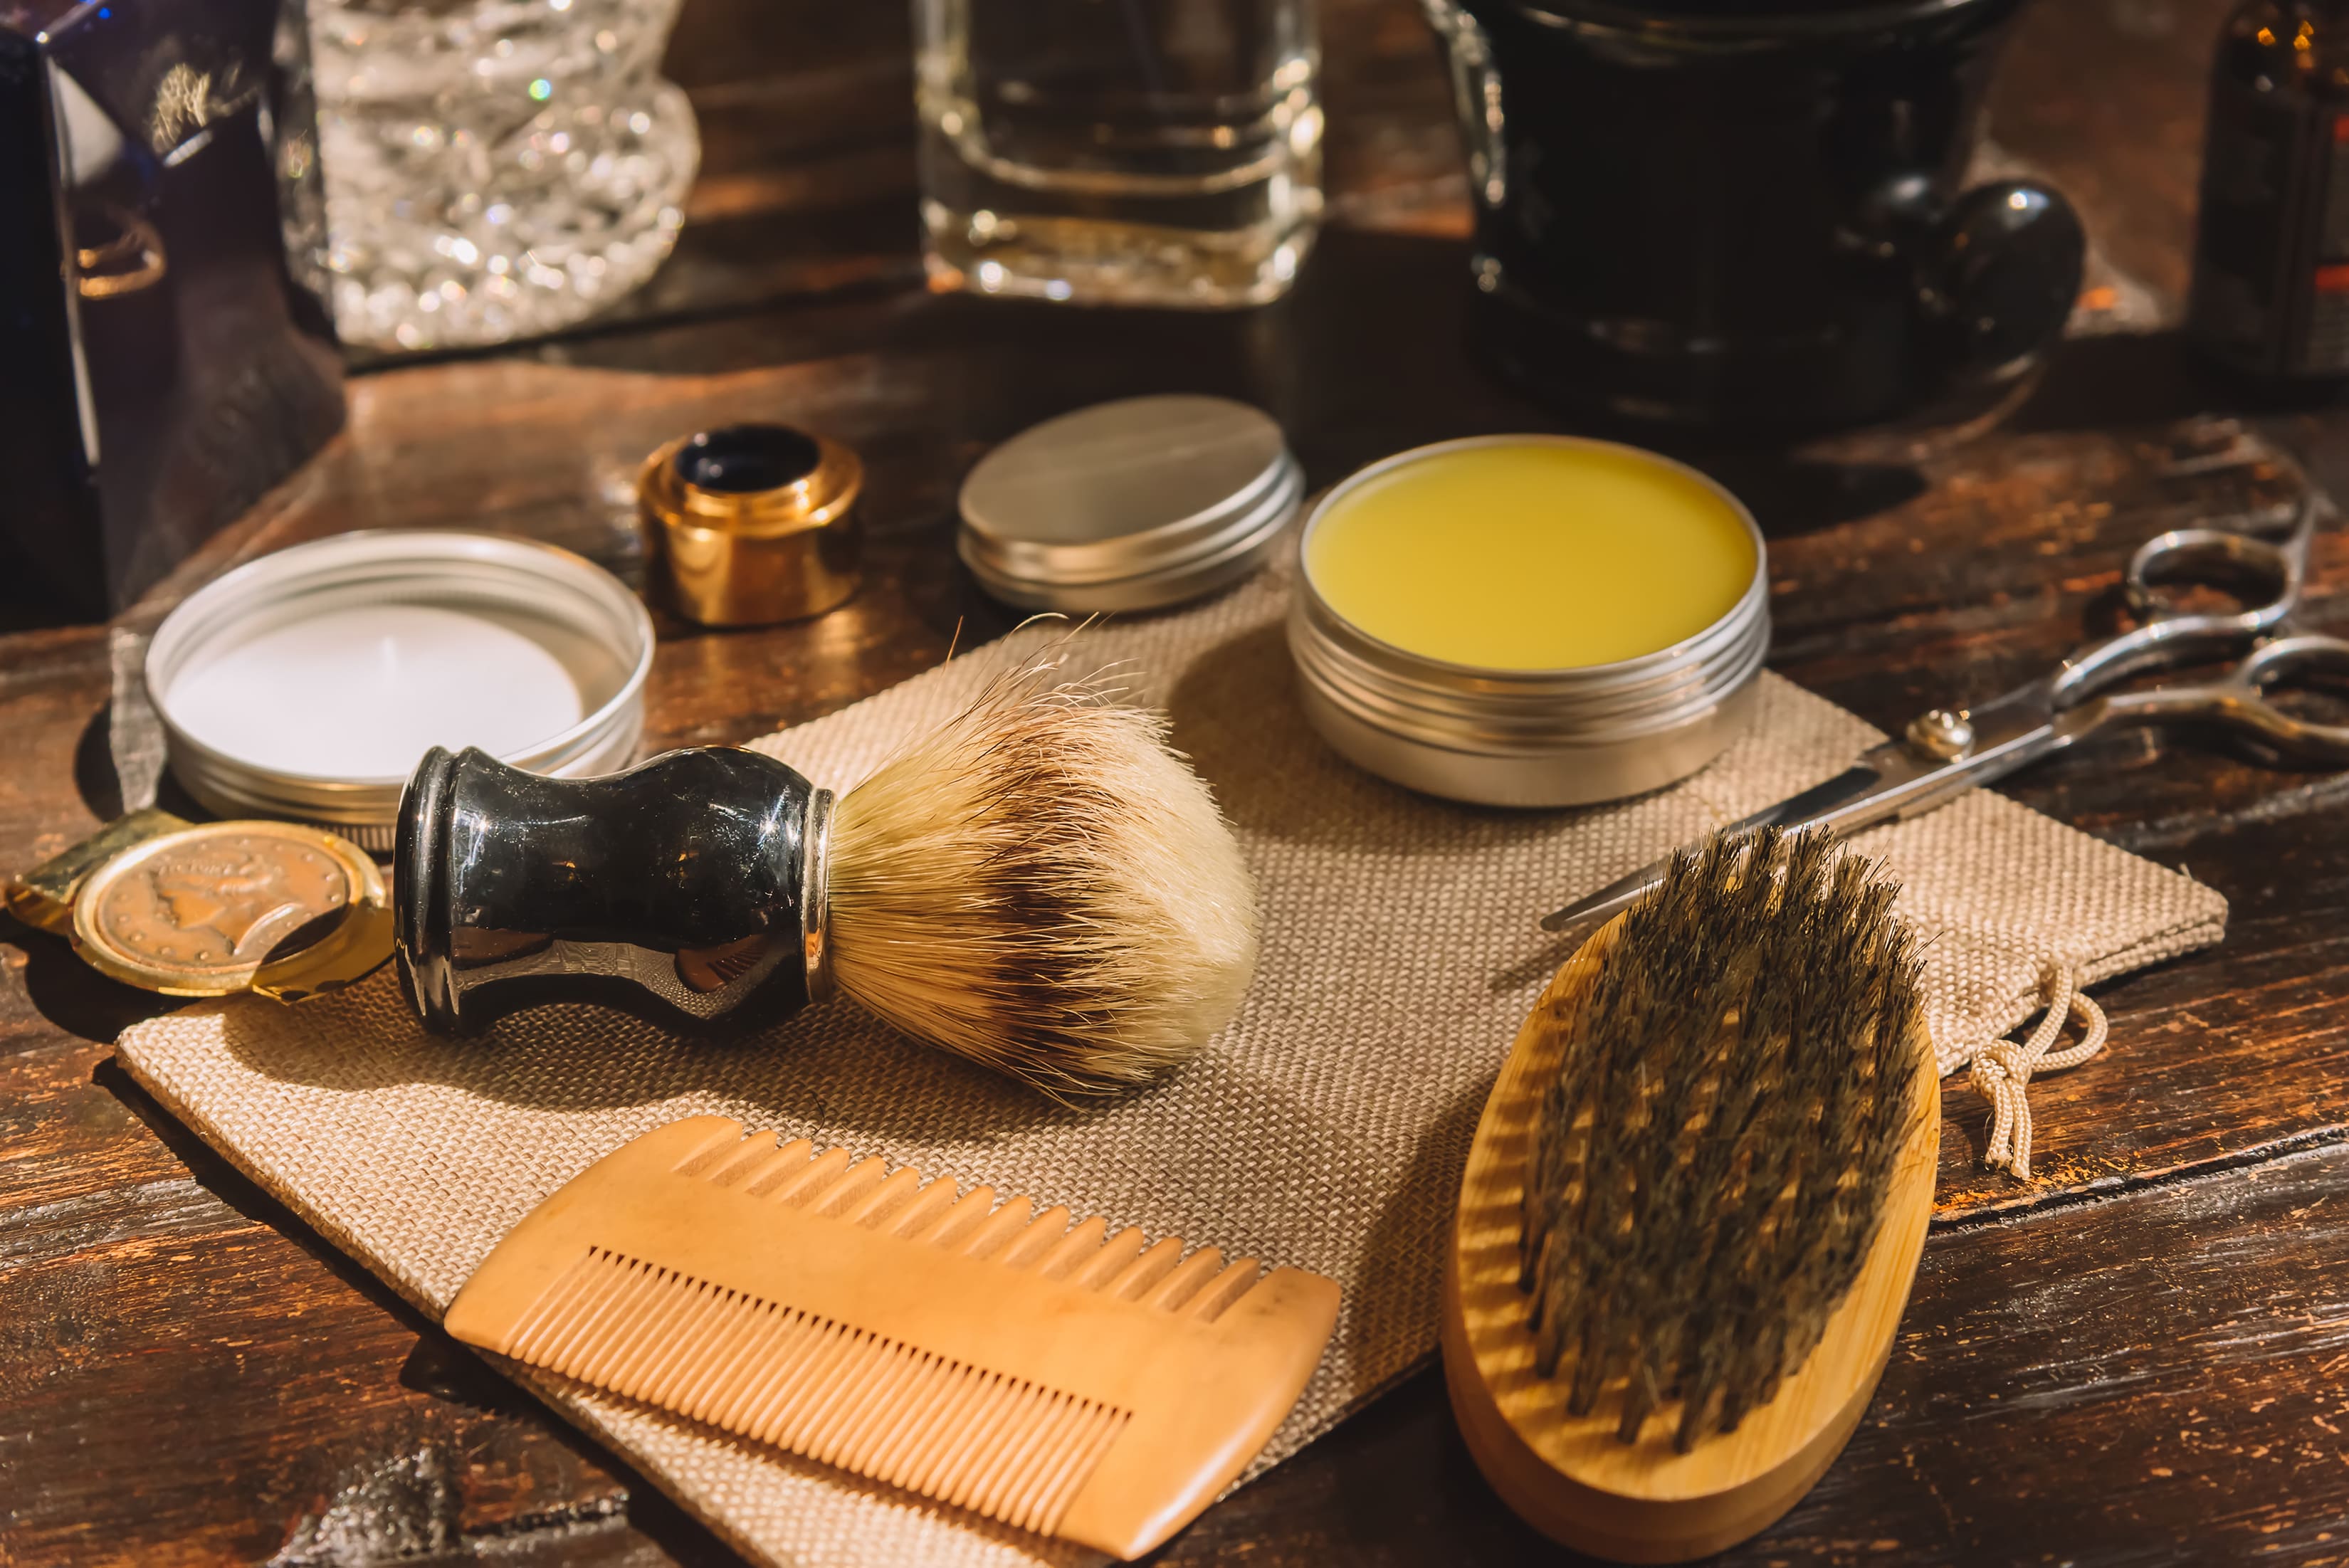 A rustic wooden table displays various beard grooming tools, including a shaving brush, scissors, combs, and tins of beard balm and wax. These essentials are artfully arranged to showcase the key products needed to tame unruly beard hair and prevent stray hairs from sticking out, ensuring a well-groomed and polished beard.